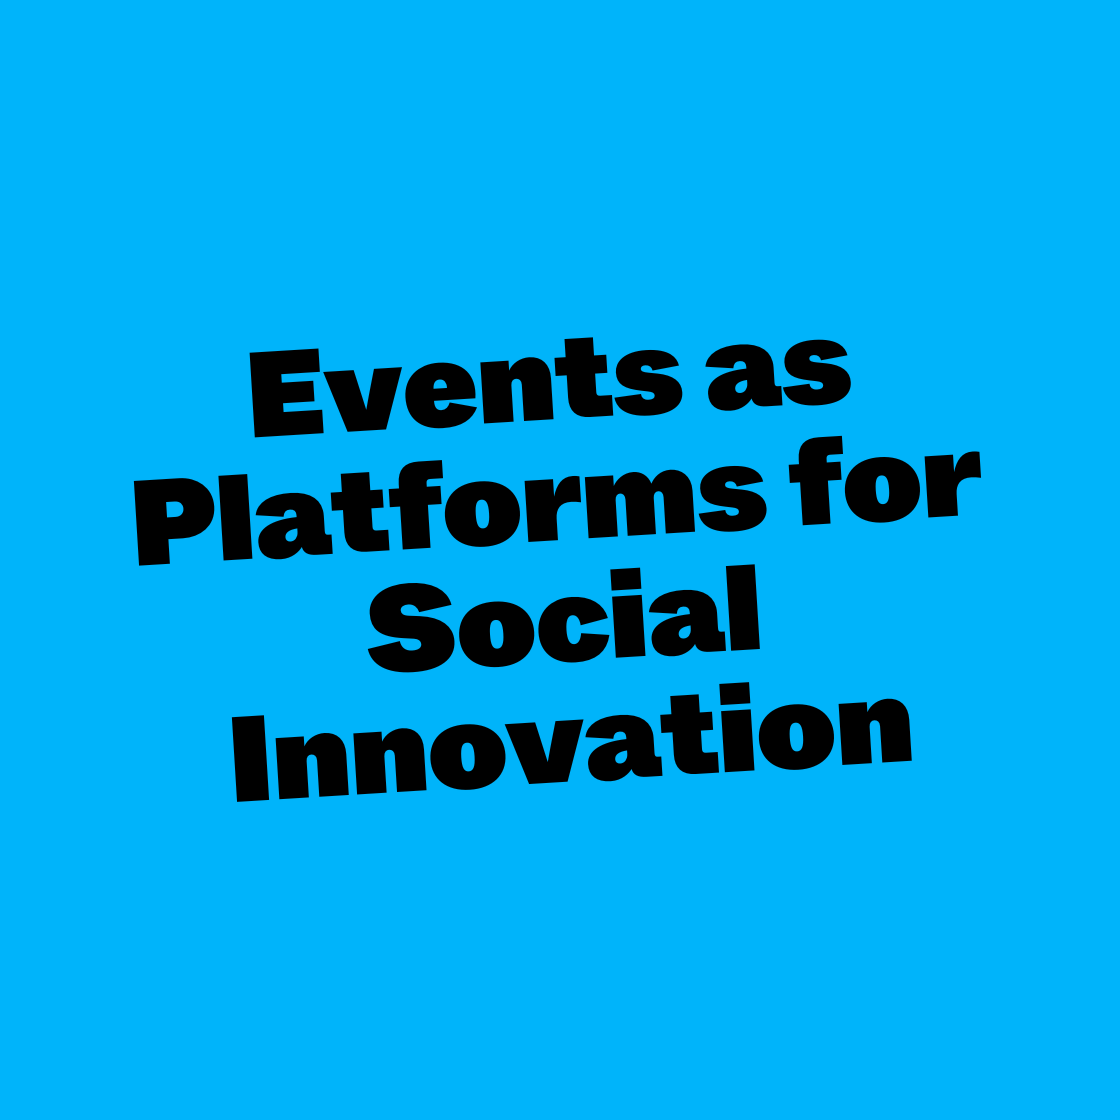 Events as Platforms for Social Innovation